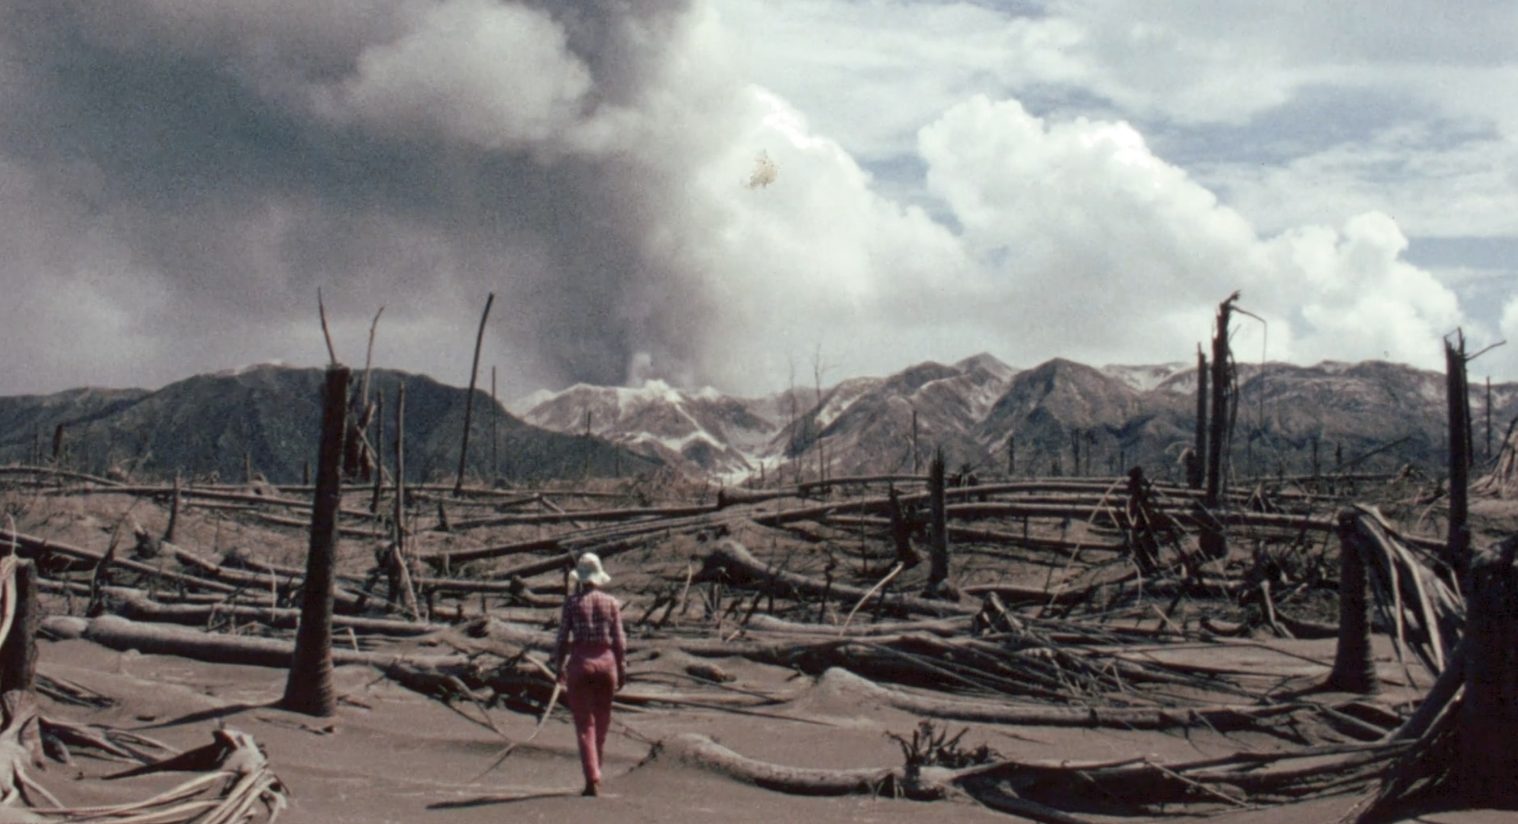 A person walking through the destruction from a volcano.